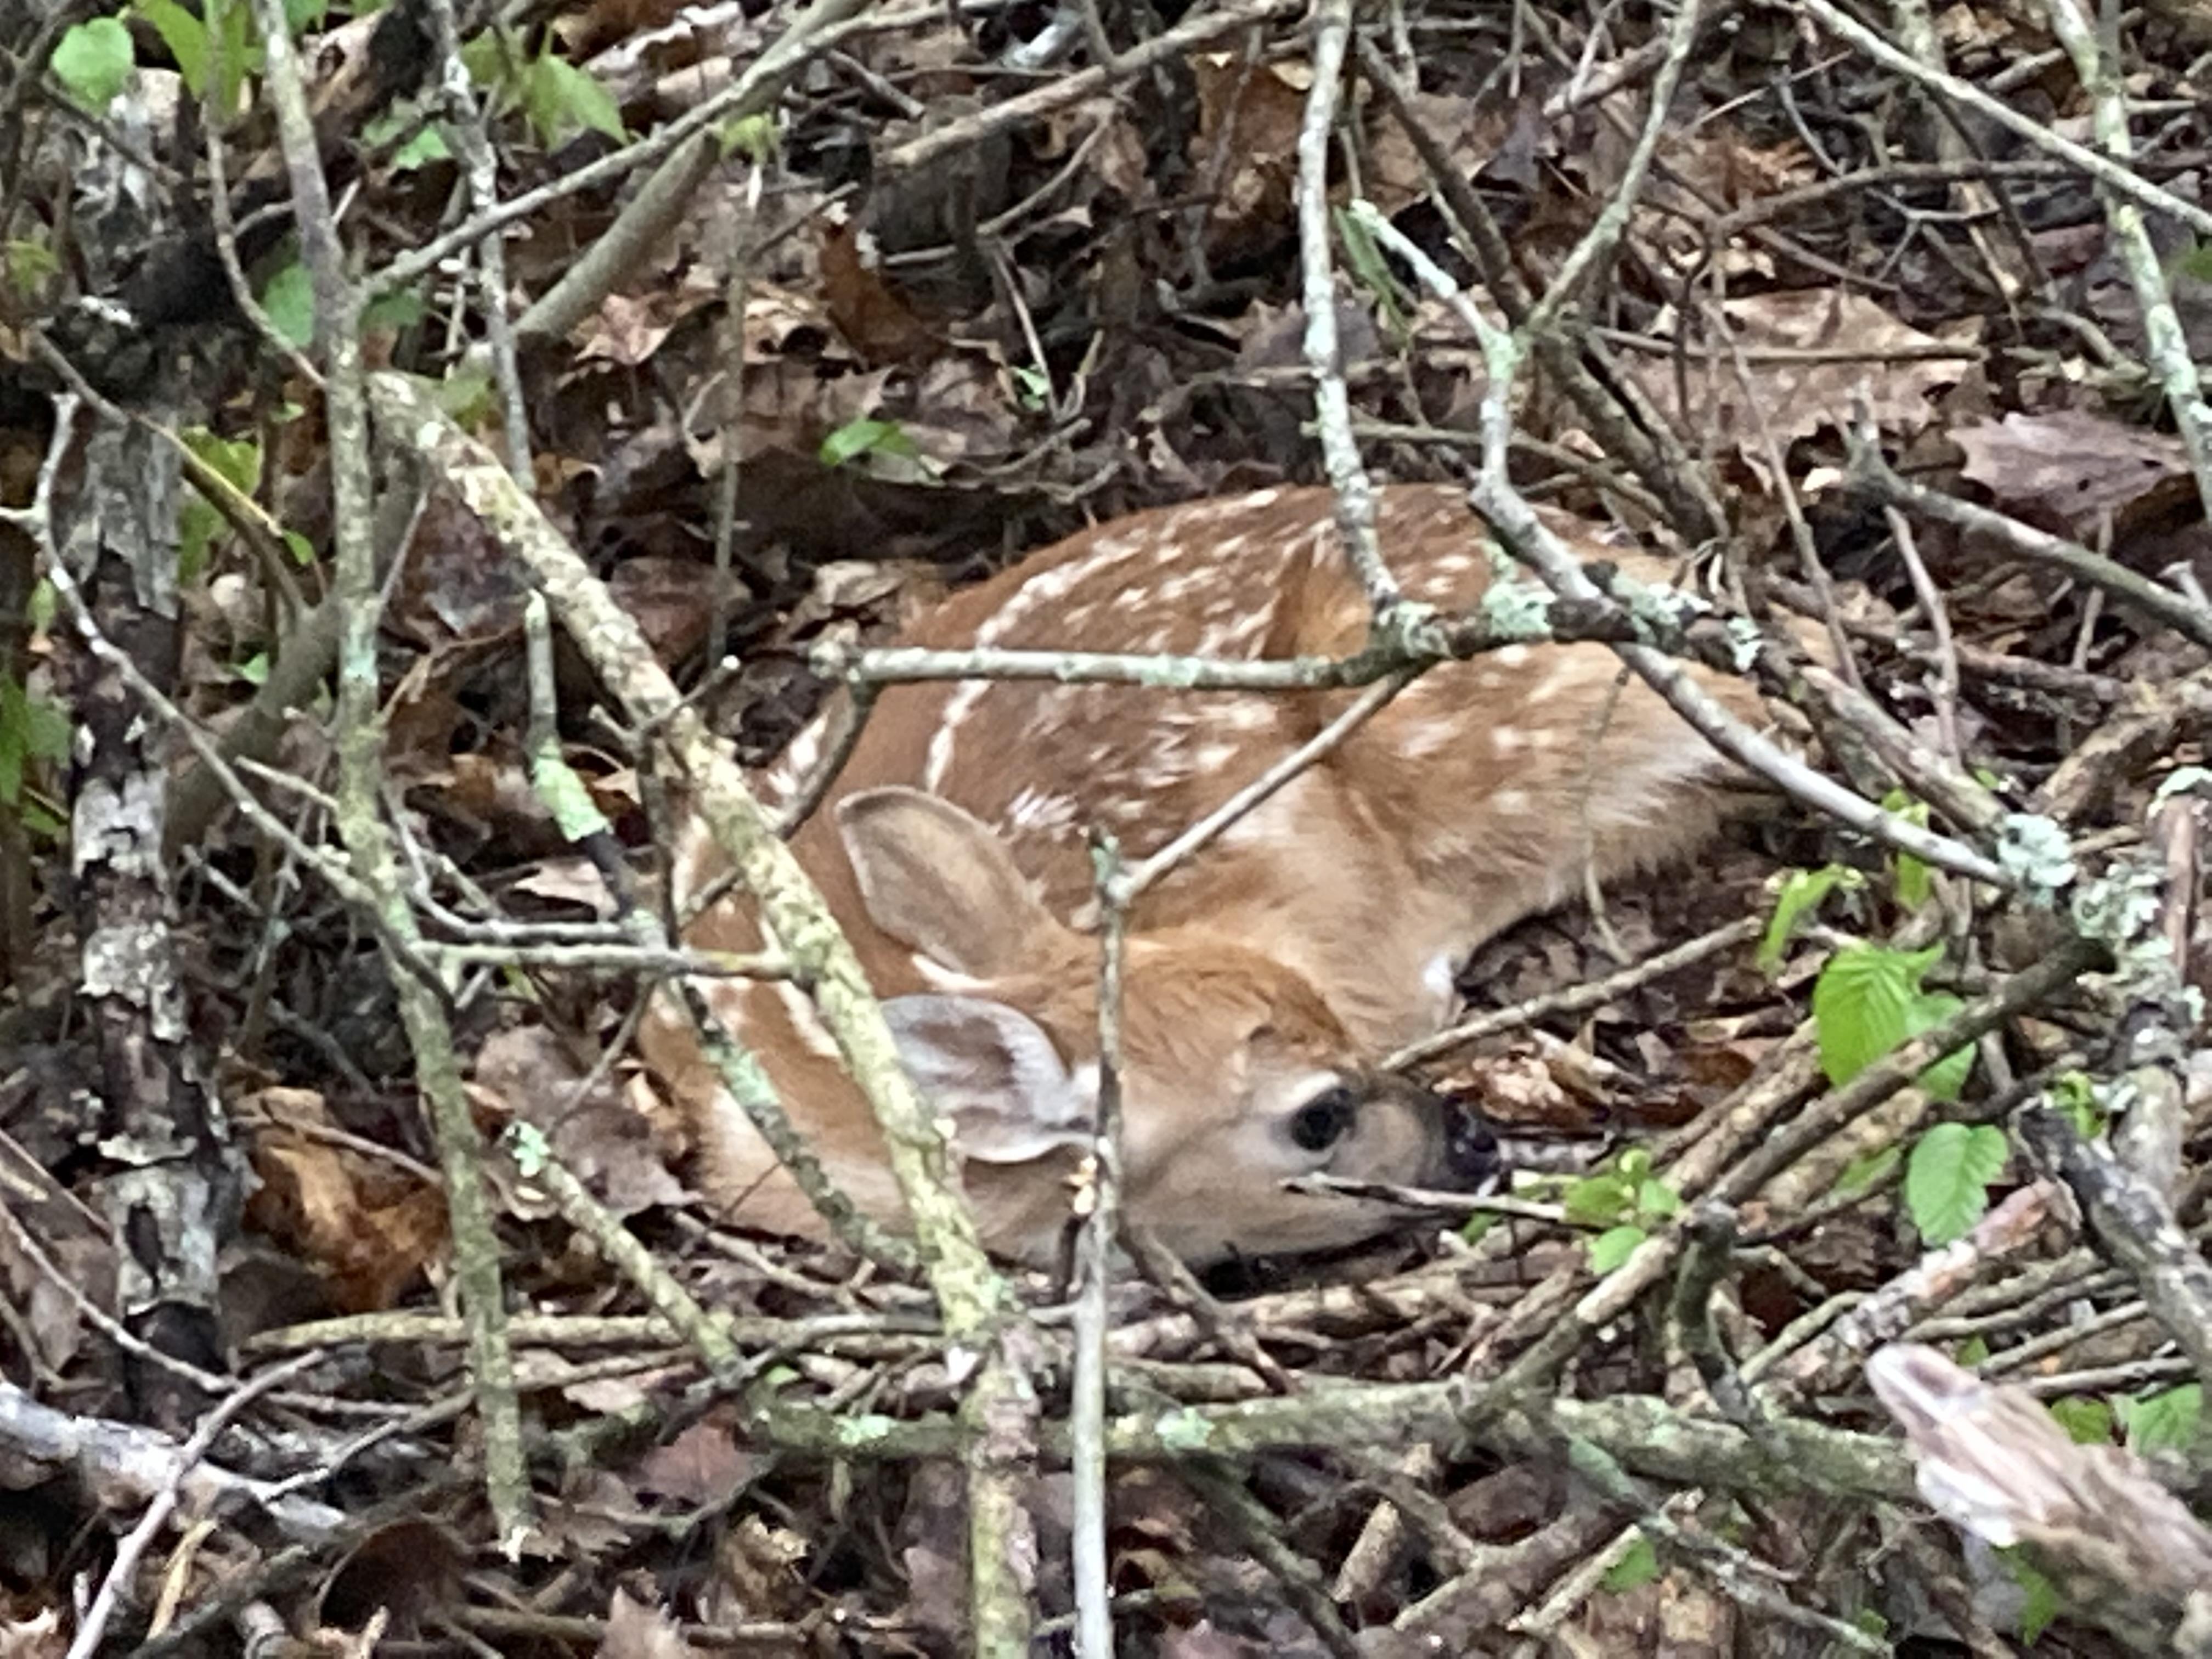 New born Fawn at Emmons Creek